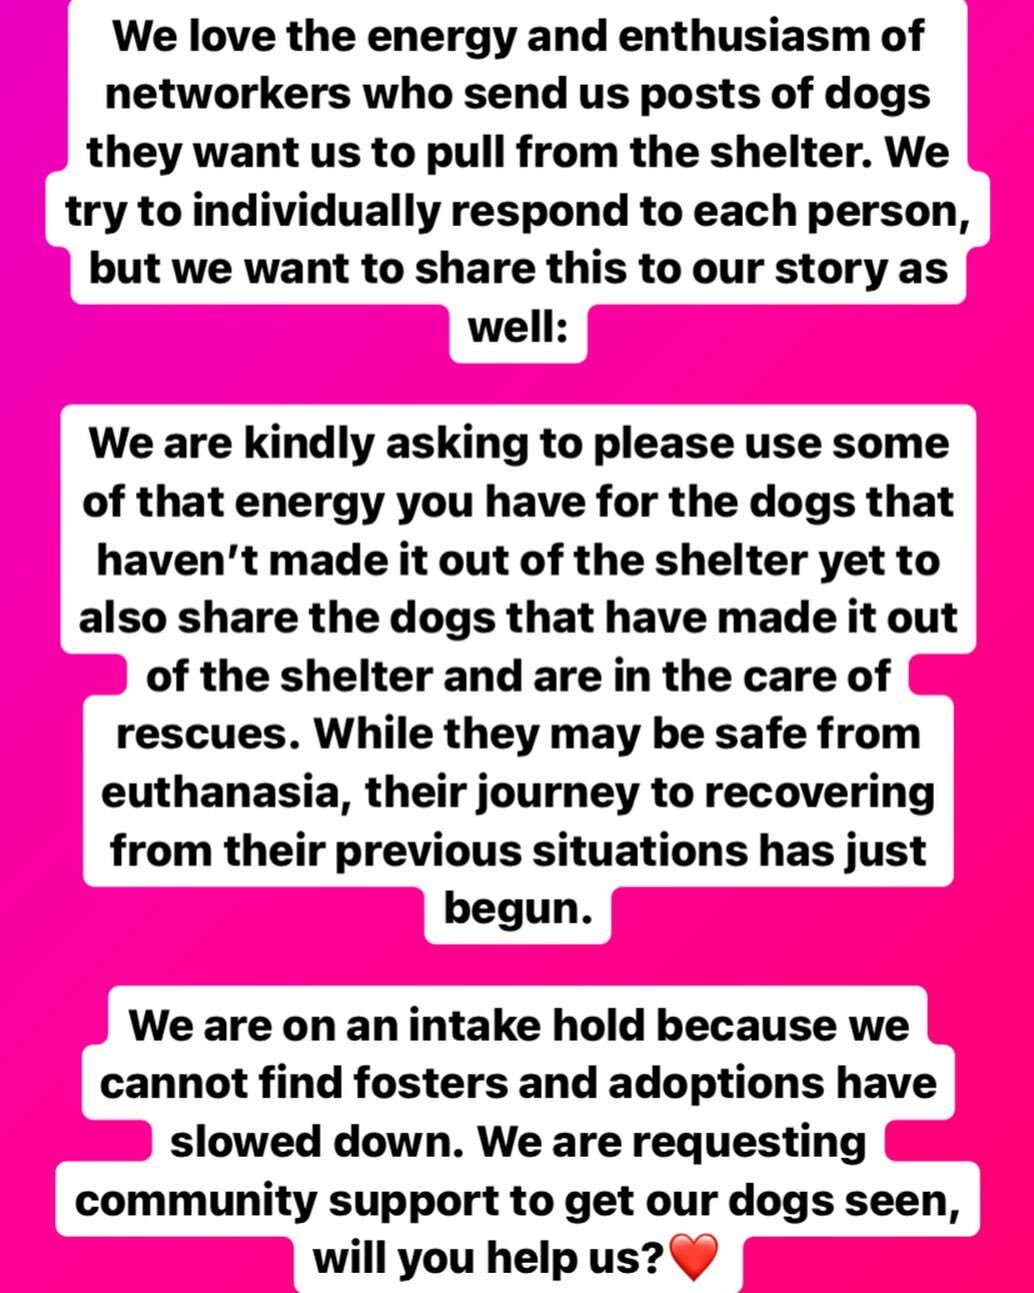 A request from one of our volunteers: 

We love the energy and enthusiasm of networkers who send us posts of dogs they want us to pull from the shelter. We try to individually respond to each person, but we want to share this to our story as well:

W